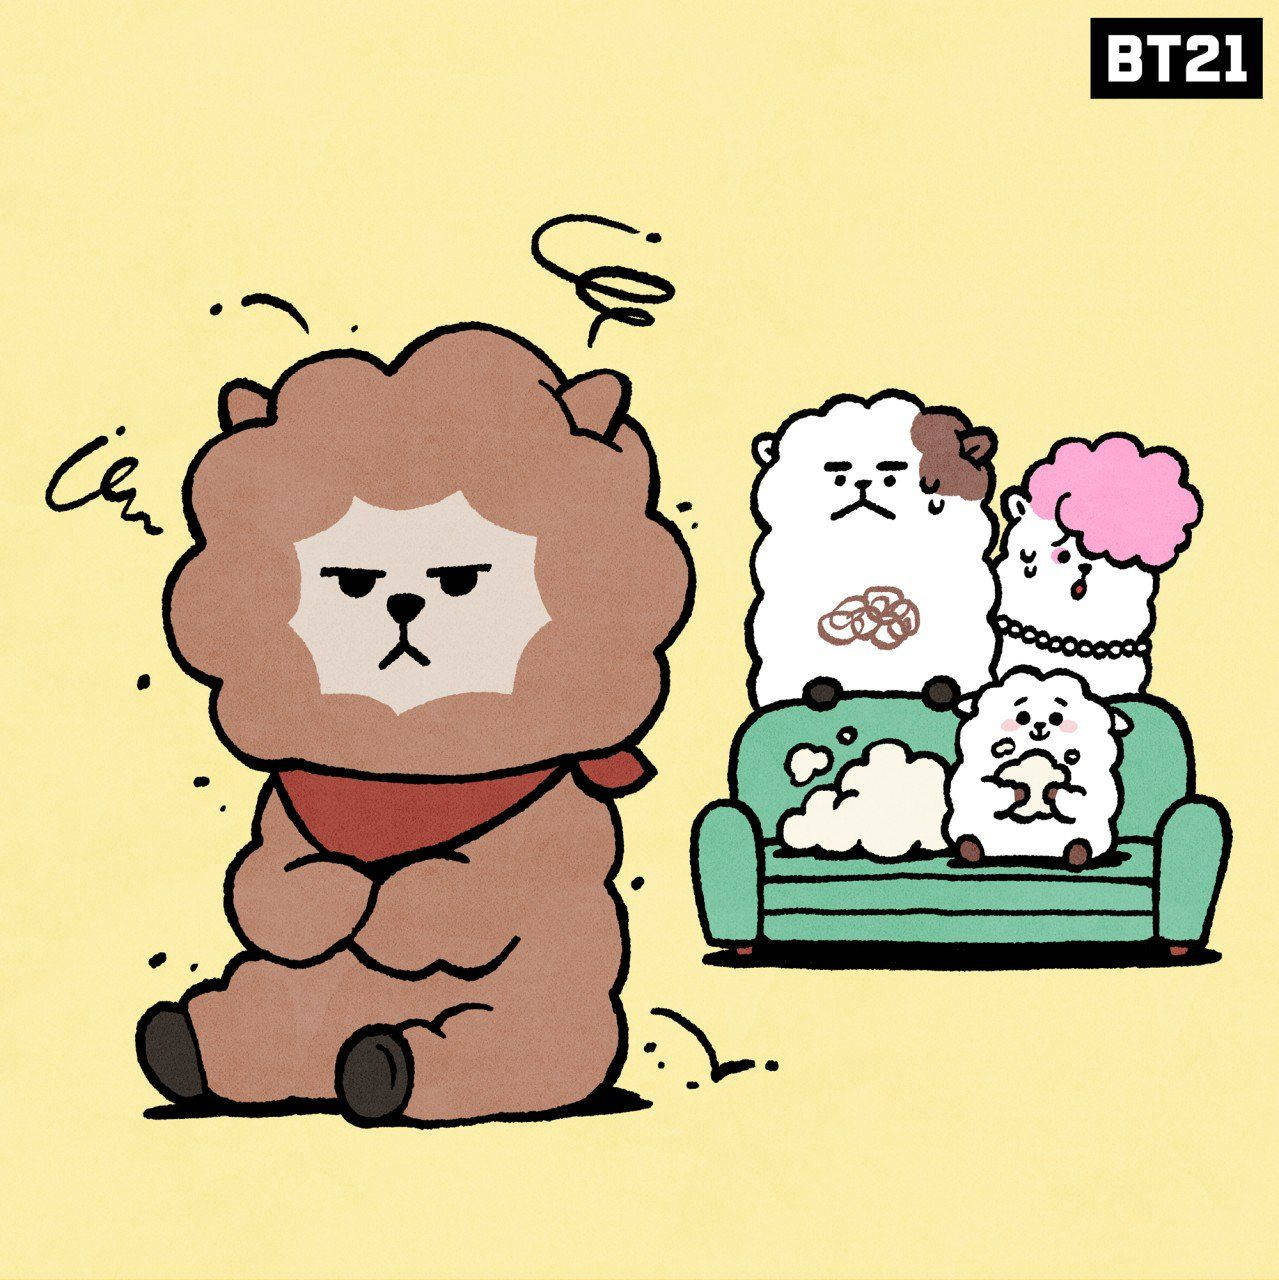 Brown Rj Bt21 With His Family Wallpaper